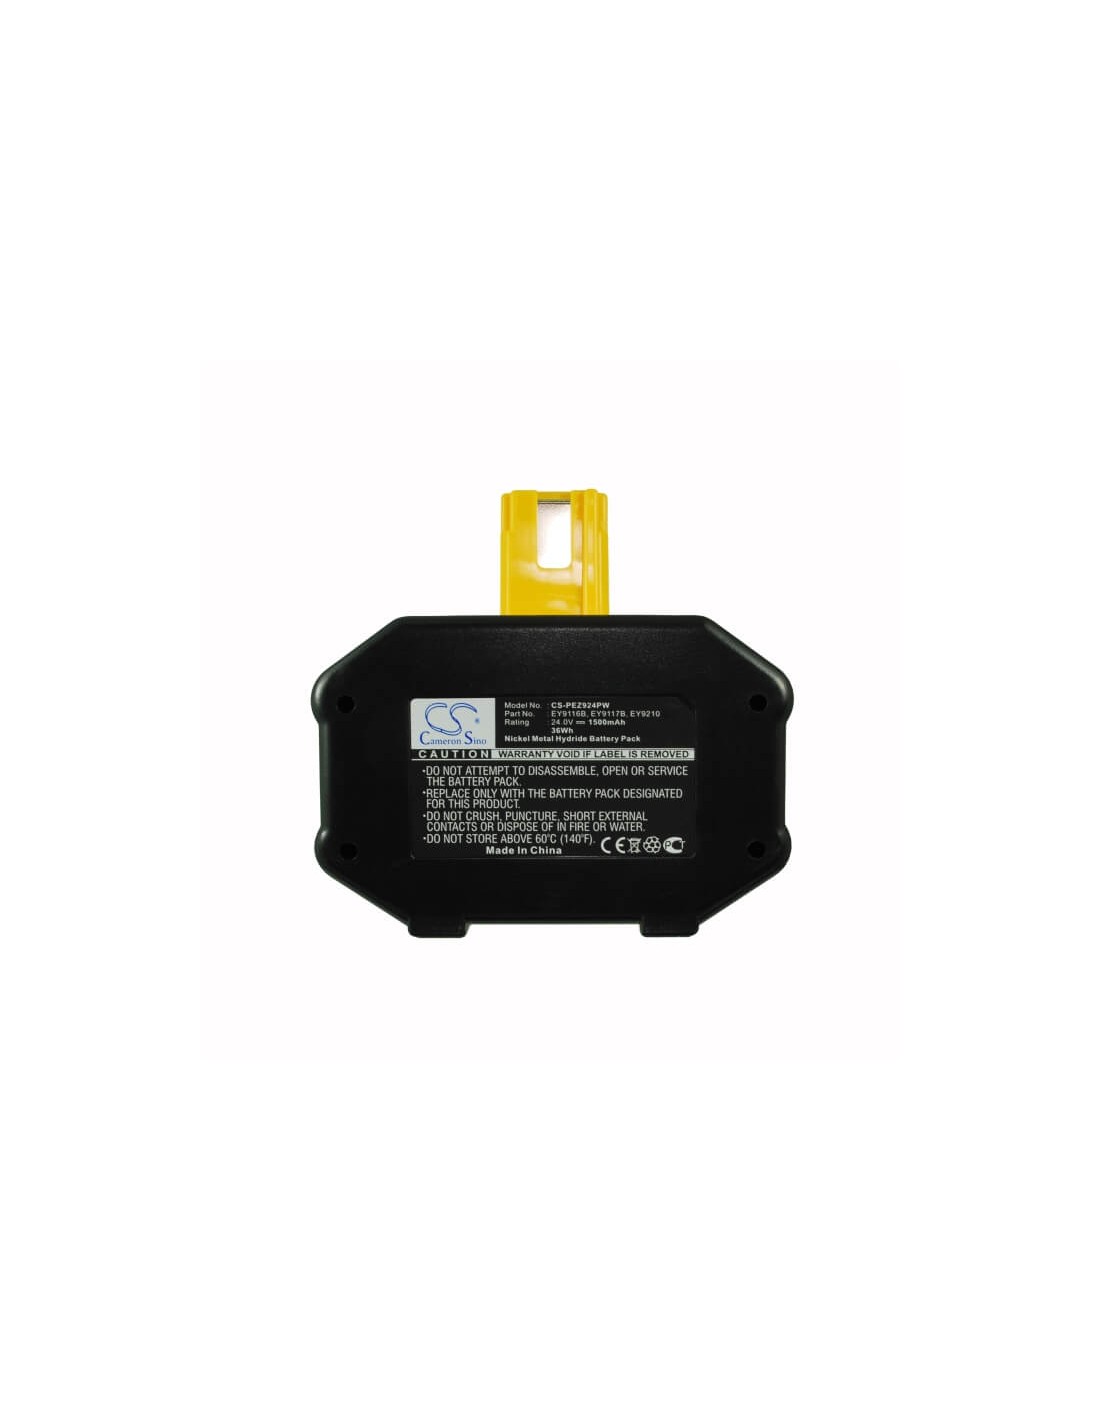 Battery for National Ey6812nqkw, Ey6812nqrw, Ey6812vqkw 24V, 1500mAh - 36.00Wh